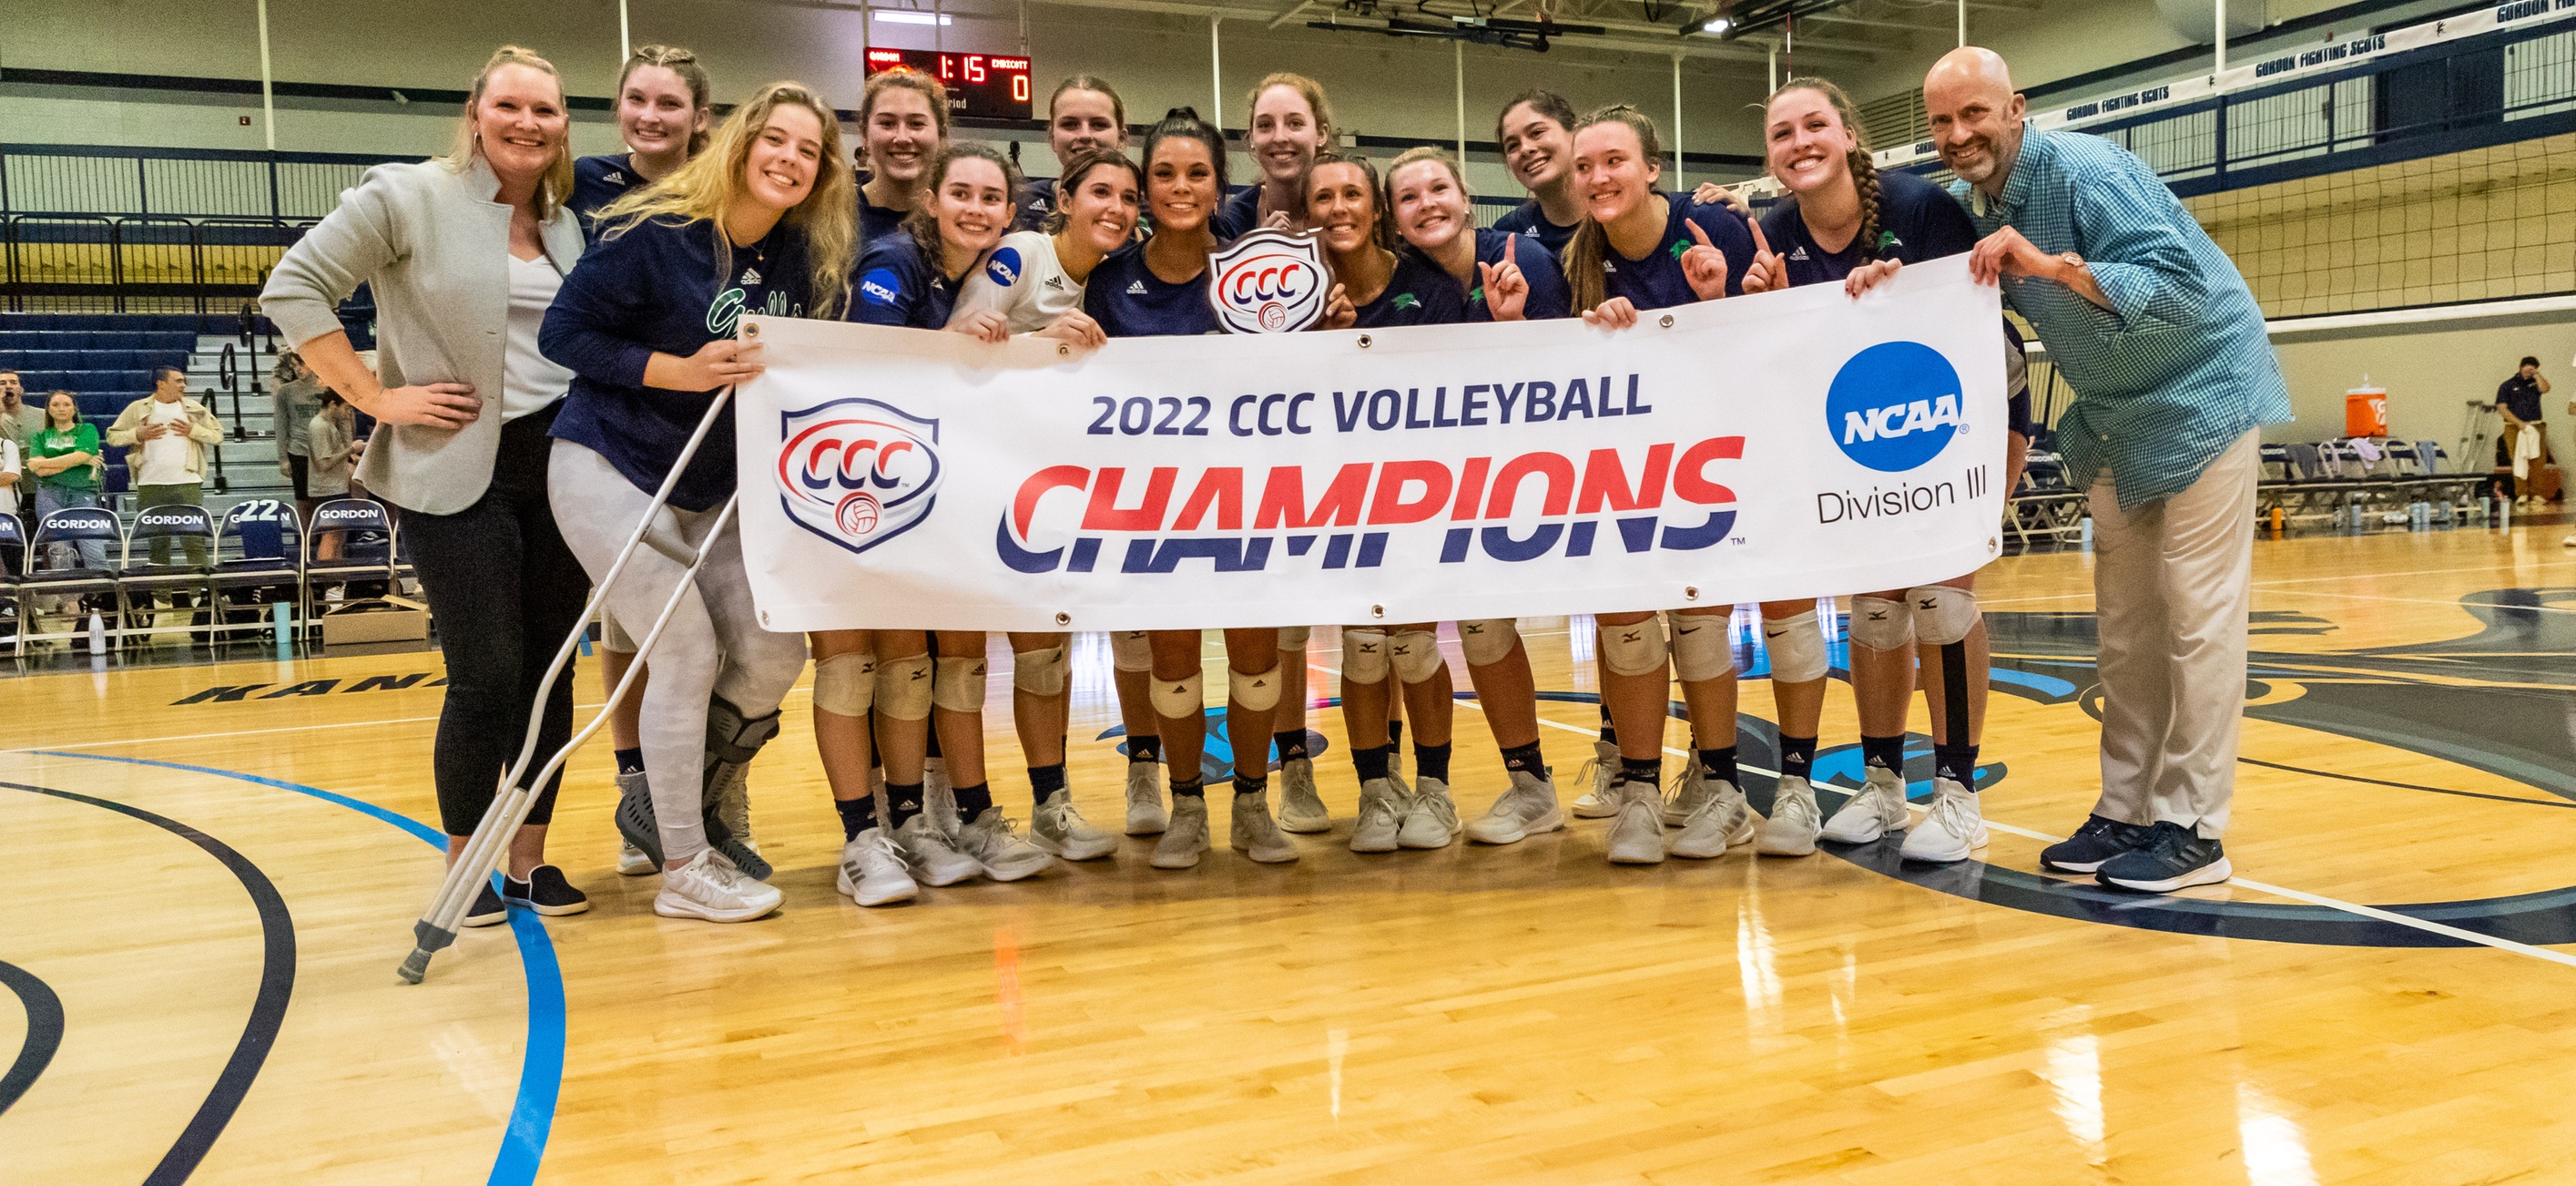 The women's volleyball team and coaching staff poses with the CCC trophy and banner on Gordon's court.